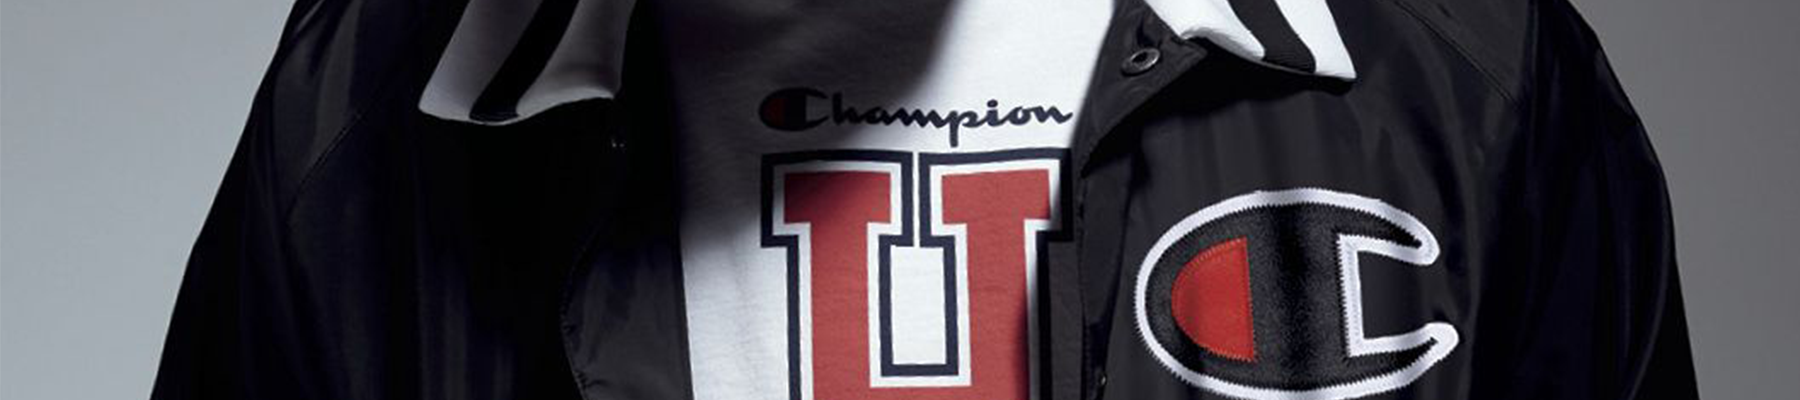 Champion is an American sportswear brand that has been around for over 100 years.